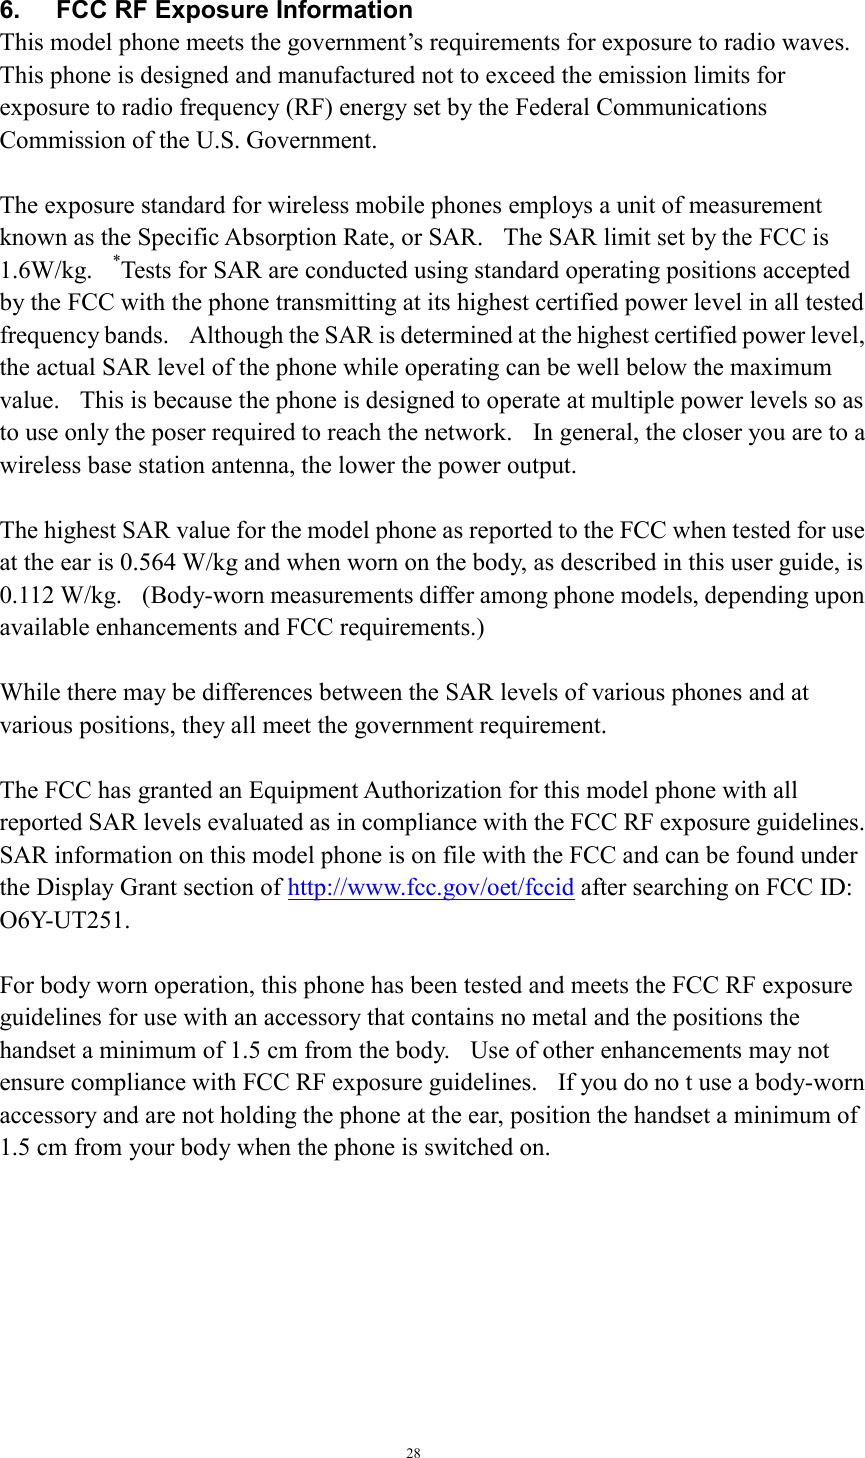 28    6.    FCC RF Exposure Information This model phone meets the government’s requirements for exposure to radio waves. This phone is designed and manufactured not to exceed the emission limits for exposure to radio frequency (RF) energy set by the Federal Communications Commission of the U.S. Government.      The exposure standard for wireless mobile phones employs a unit of measurement known as the Specific Absorption Rate, or SAR.    The SAR limit set by the FCC is 1.6W/kg.  *Tests for SAR are conducted using standard operating positions accepted by the FCC with the phone transmitting at its highest certified power level in all tested frequency bands.    Although the SAR is determined at the highest certified power level, the actual SAR level of the phone while operating can be well below the maximum value.    This is because the phone is designed to operate at multiple power levels so as to use only the poser required to reach the network.    In general, the closer you are to a wireless base station antenna, the lower the power output.  The highest SAR value for the model phone as reported to the FCC when tested for use at the ear is 0.564 W/kg and when worn on the body, as described in this user guide, is 0.112 W/kg.    (Body-worn measurements differ among phone models, depending upon available enhancements and FCC requirements.)  While there may be differences between the SAR levels of various phones and at various positions, they all meet the government requirement.  The FCC has granted an Equipment Authorization for this model phone with all reported SAR levels evaluated as in compliance with the FCC RF exposure guidelines.   SAR information on this model phone is on file with the FCC and can be found under the Display Grant section of http://www.fcc.gov/oet/fccid after searching on FCC ID: O6Y-UT251.  For body worn operation, this phone has been tested and meets the FCC RF exposure guidelines for use with an accessory that contains no metal and the positions the handset a minimum of 1.5 cm from the body.    Use of other enhancements may not ensure compliance with FCC RF exposure guidelines.    If you do no t use a body-worn accessory and are not holding the phone at the ear, position the handset a minimum of 1.5 cm from your body when the phone is switched on.   